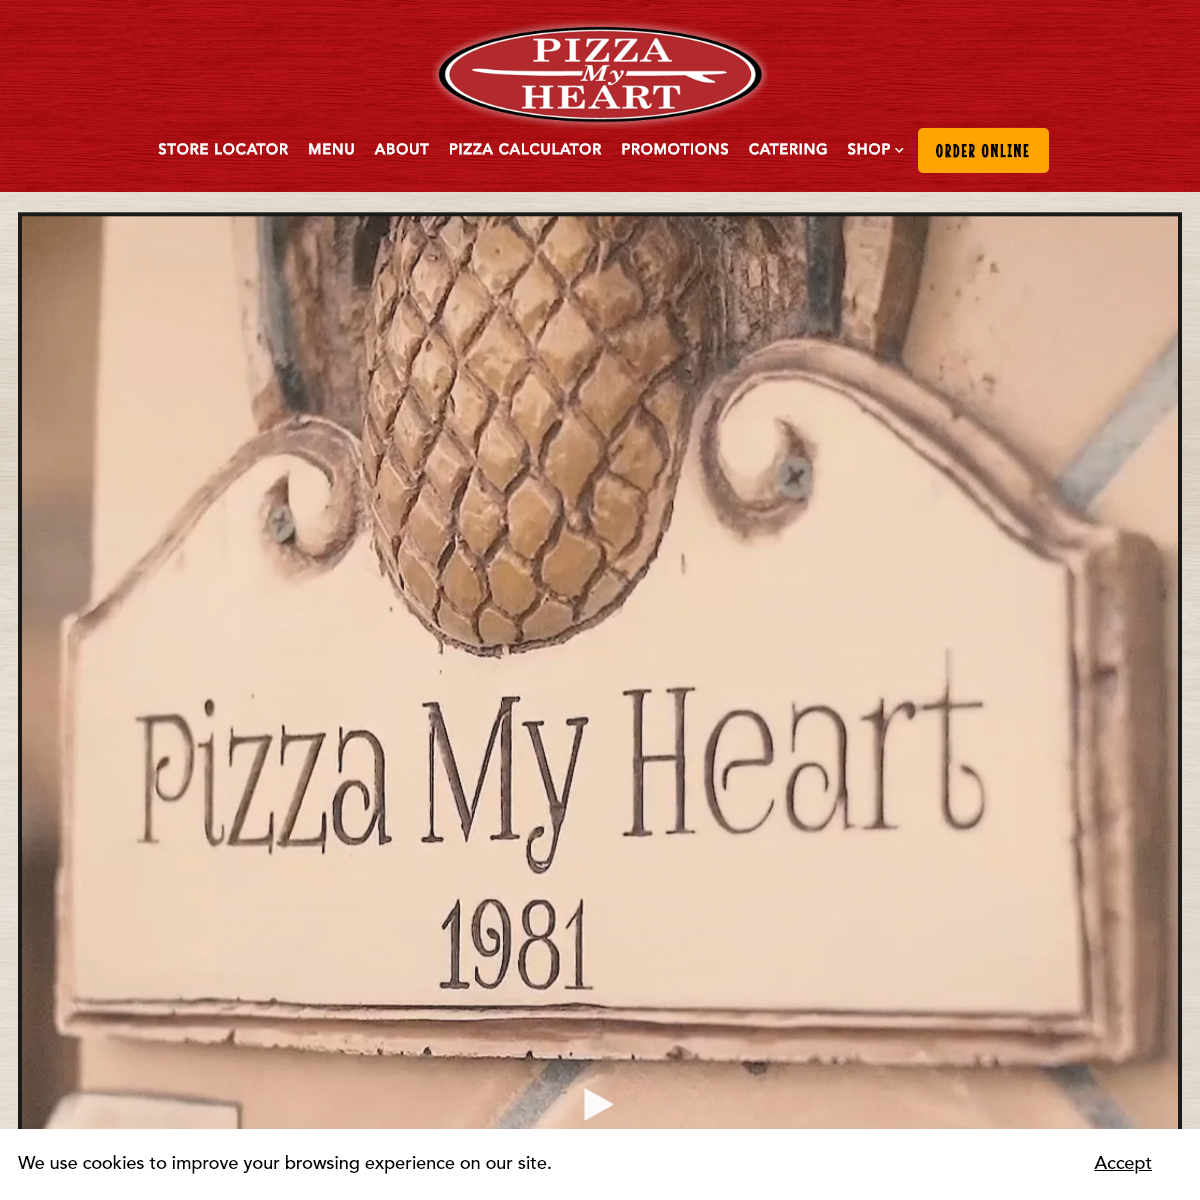 A complete backup of pizzamyheart.com